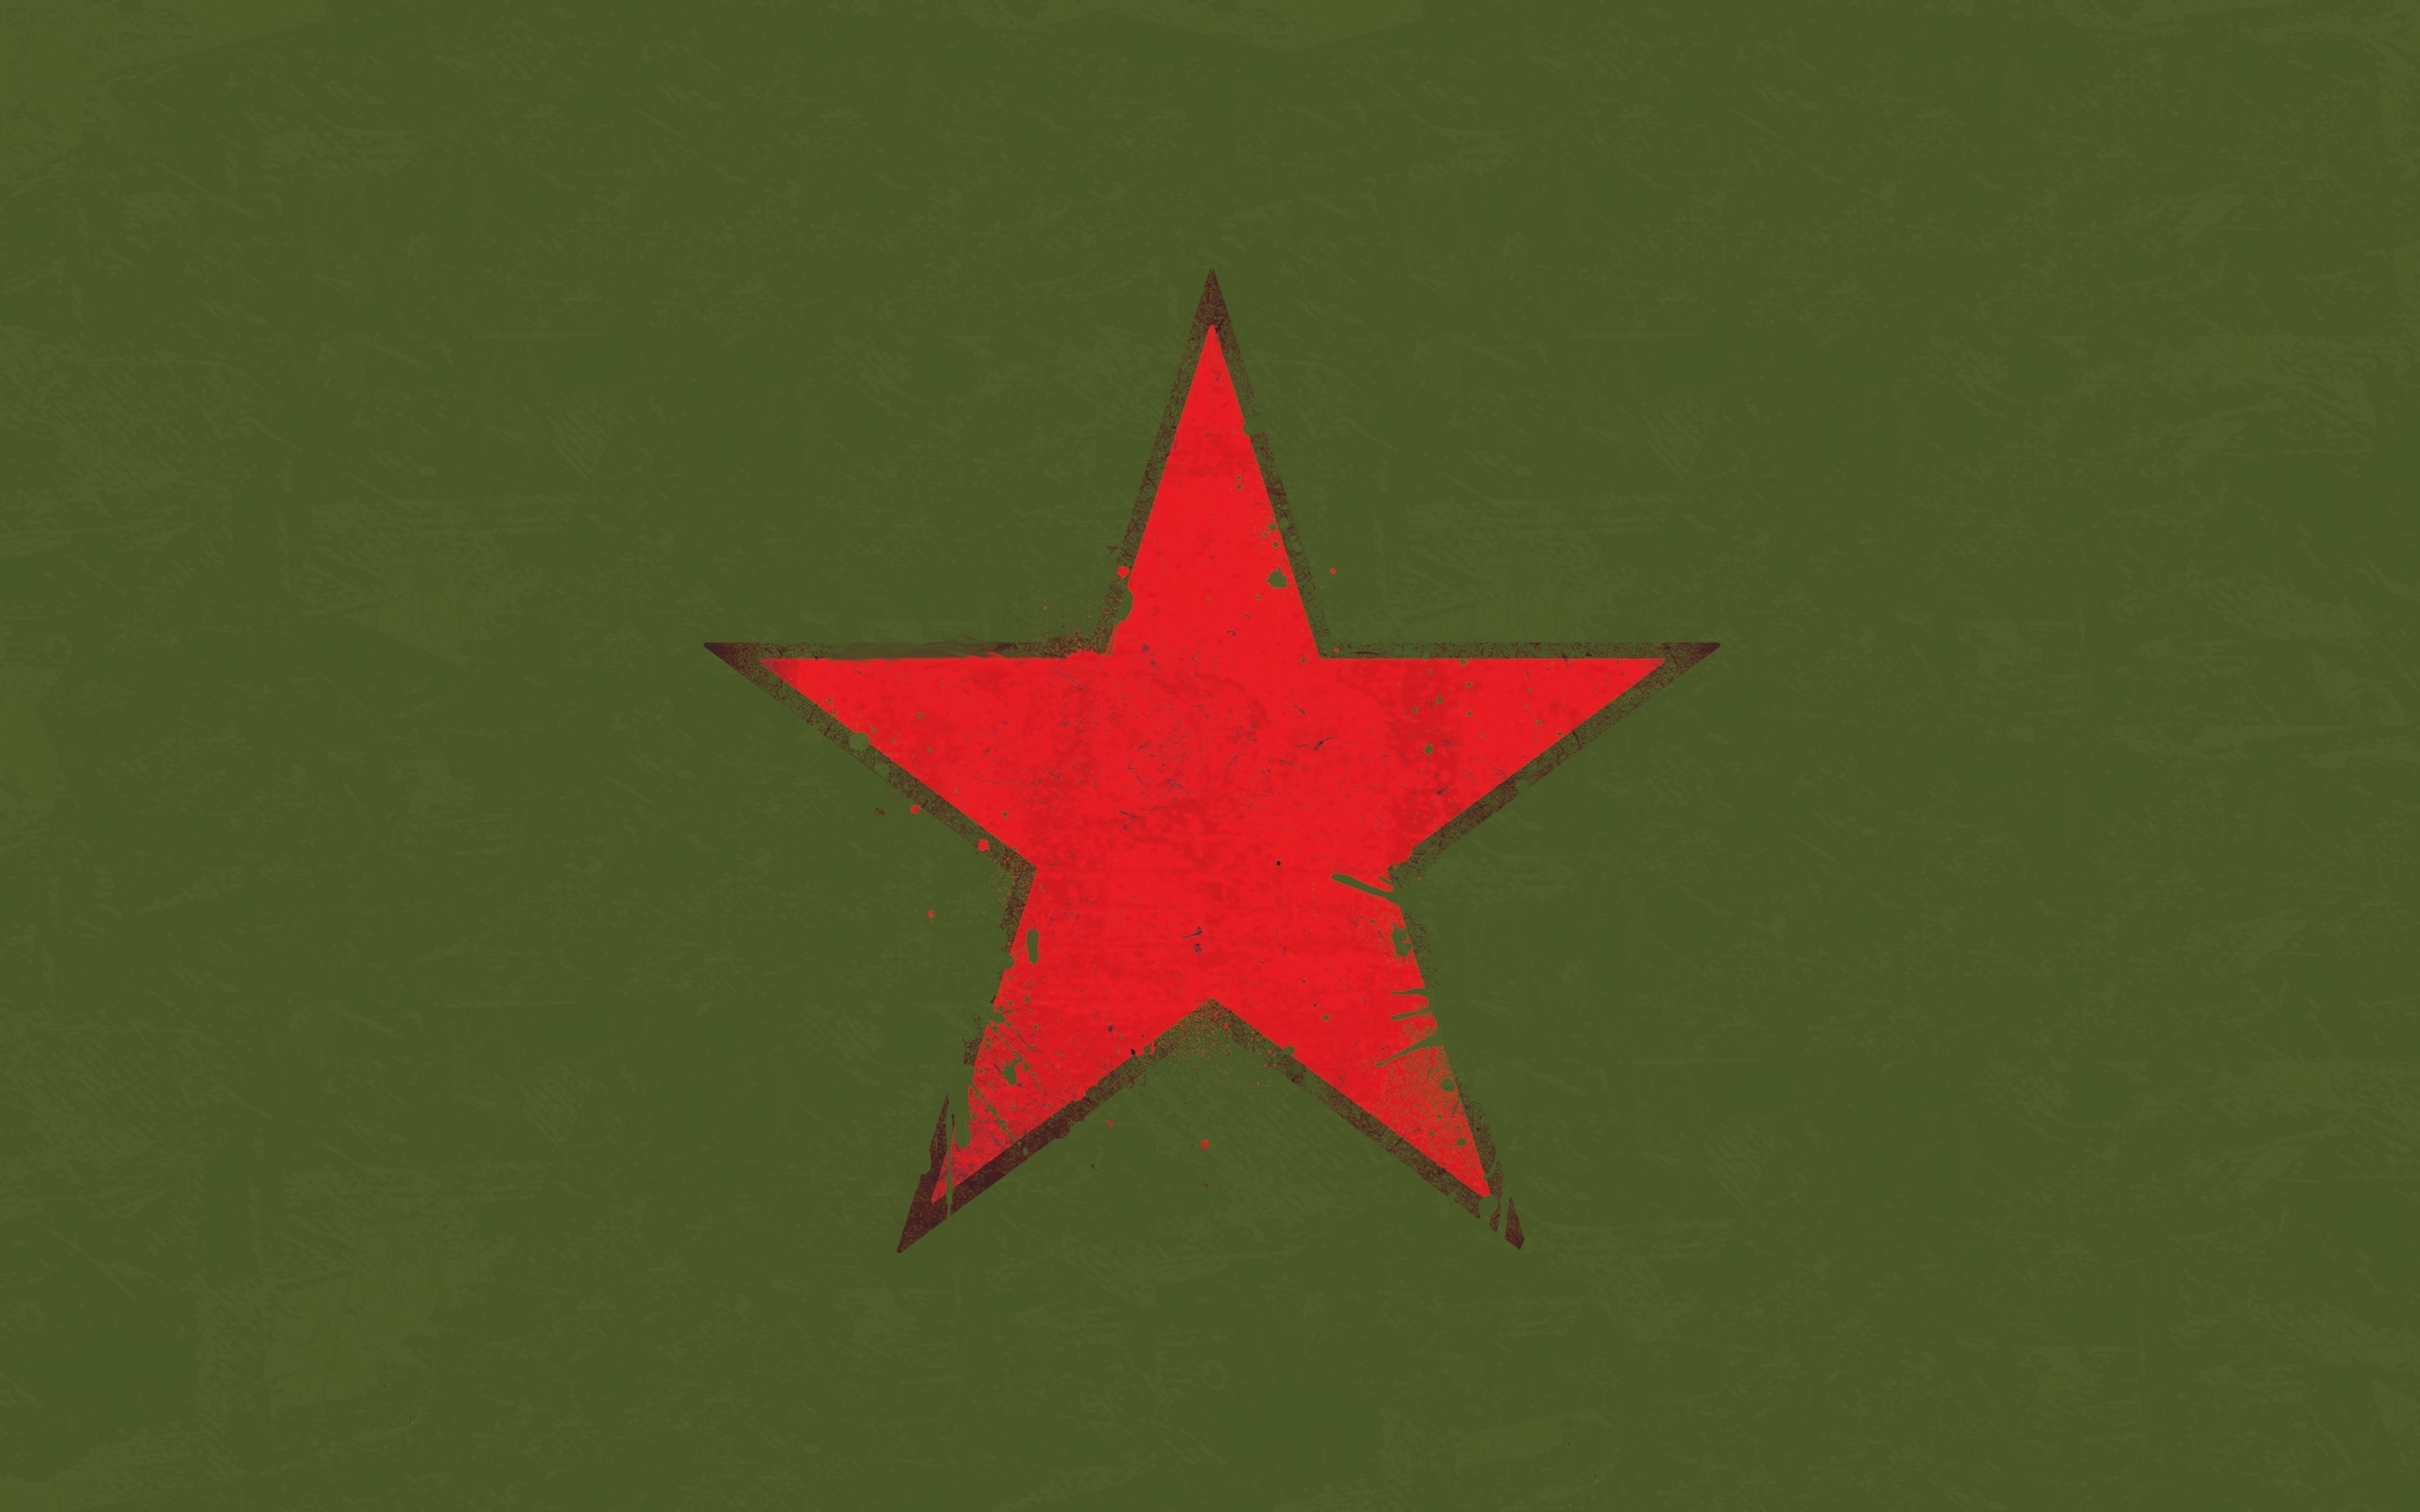 rage against the machine red star t shirt